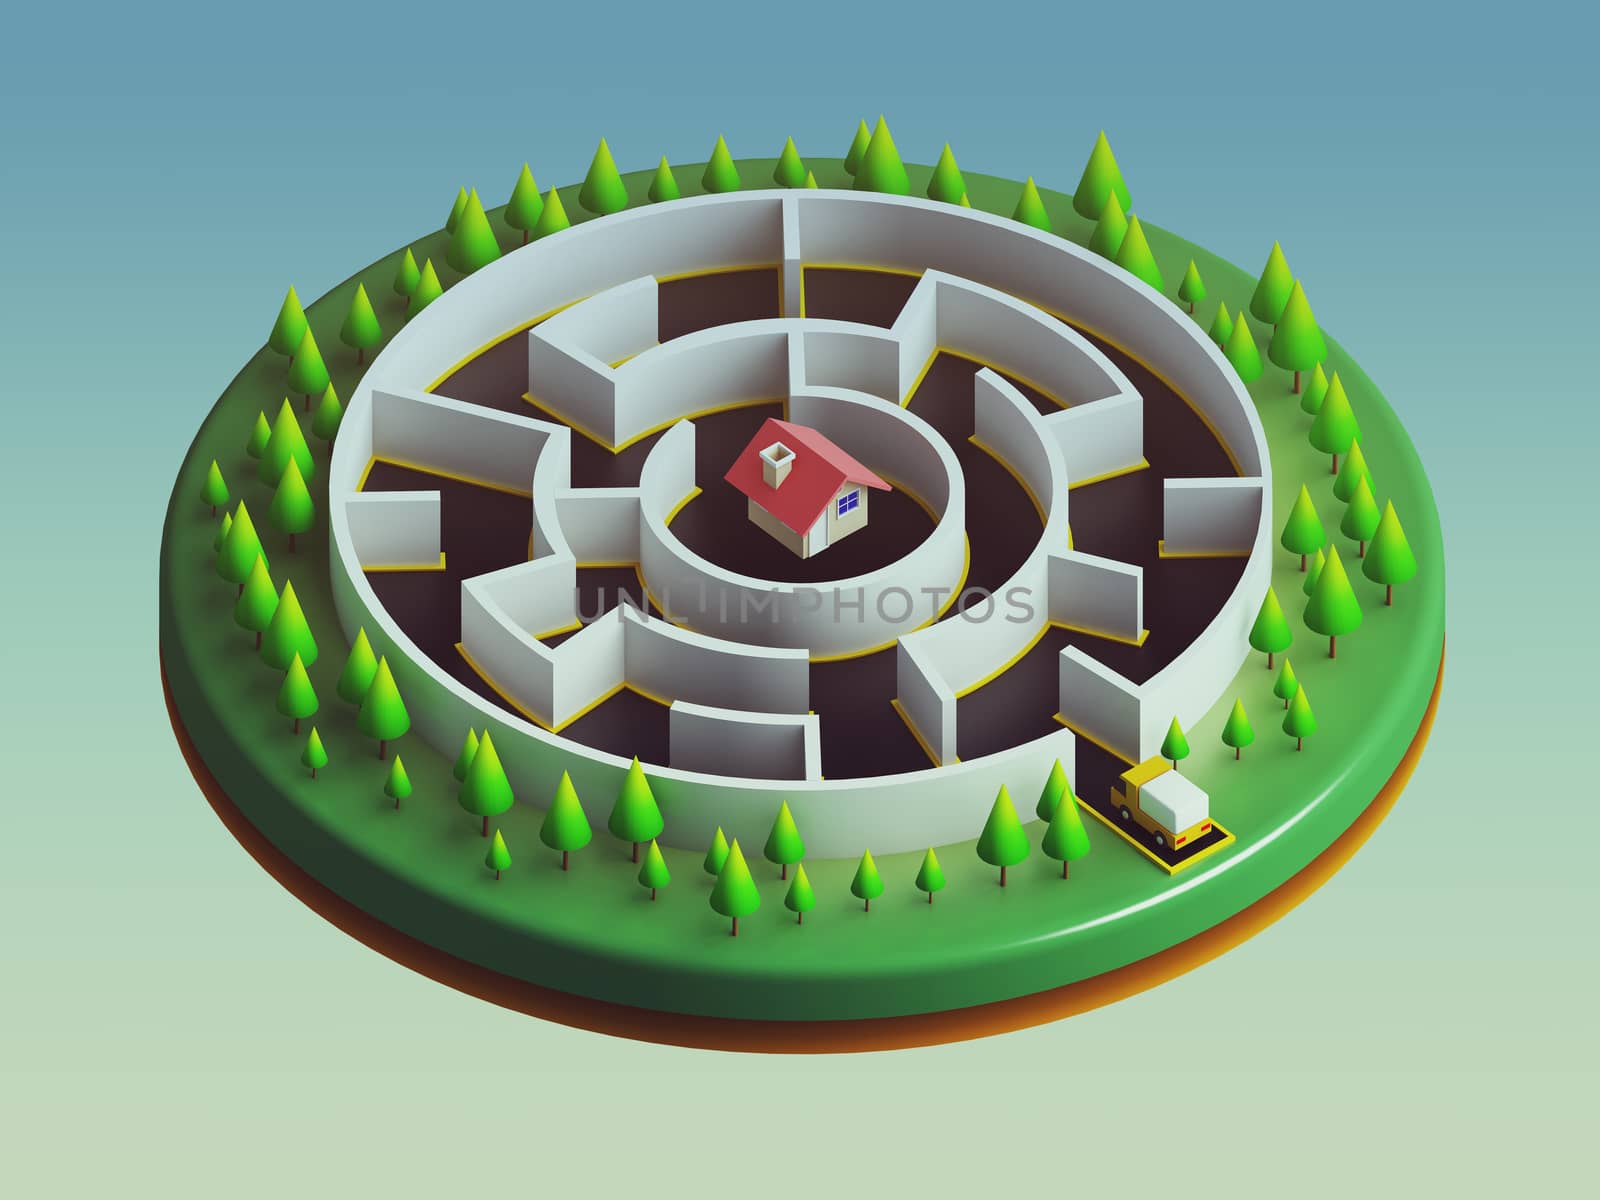 Cars are about to enter the maze. The goal is to stay ahead